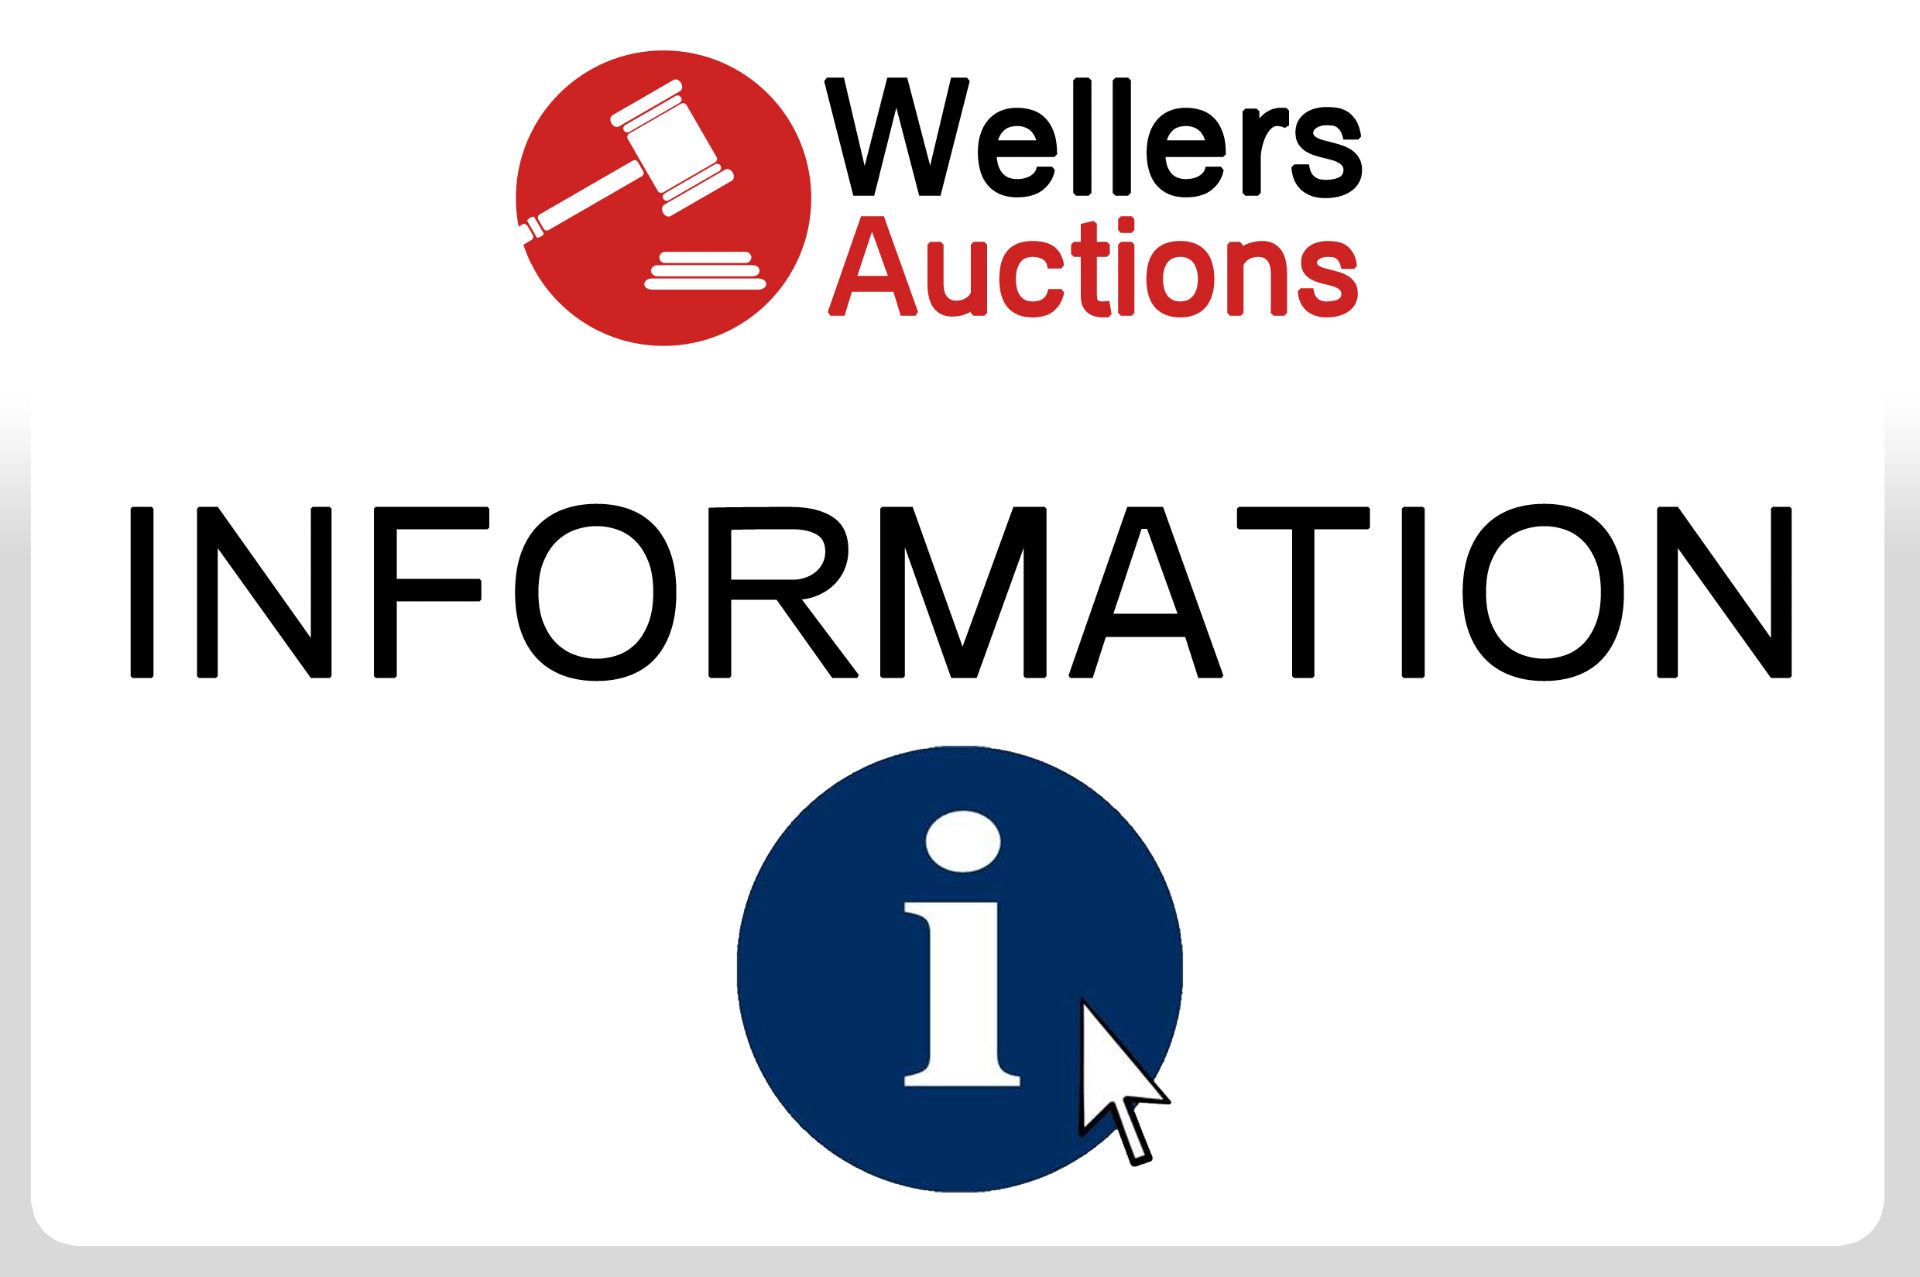 IMPORTANT INFO: THIS IS AN AUCTION OF SNOOKER RELATED MEMORABILIA, ANTIQUES, TABLES, CUES AND